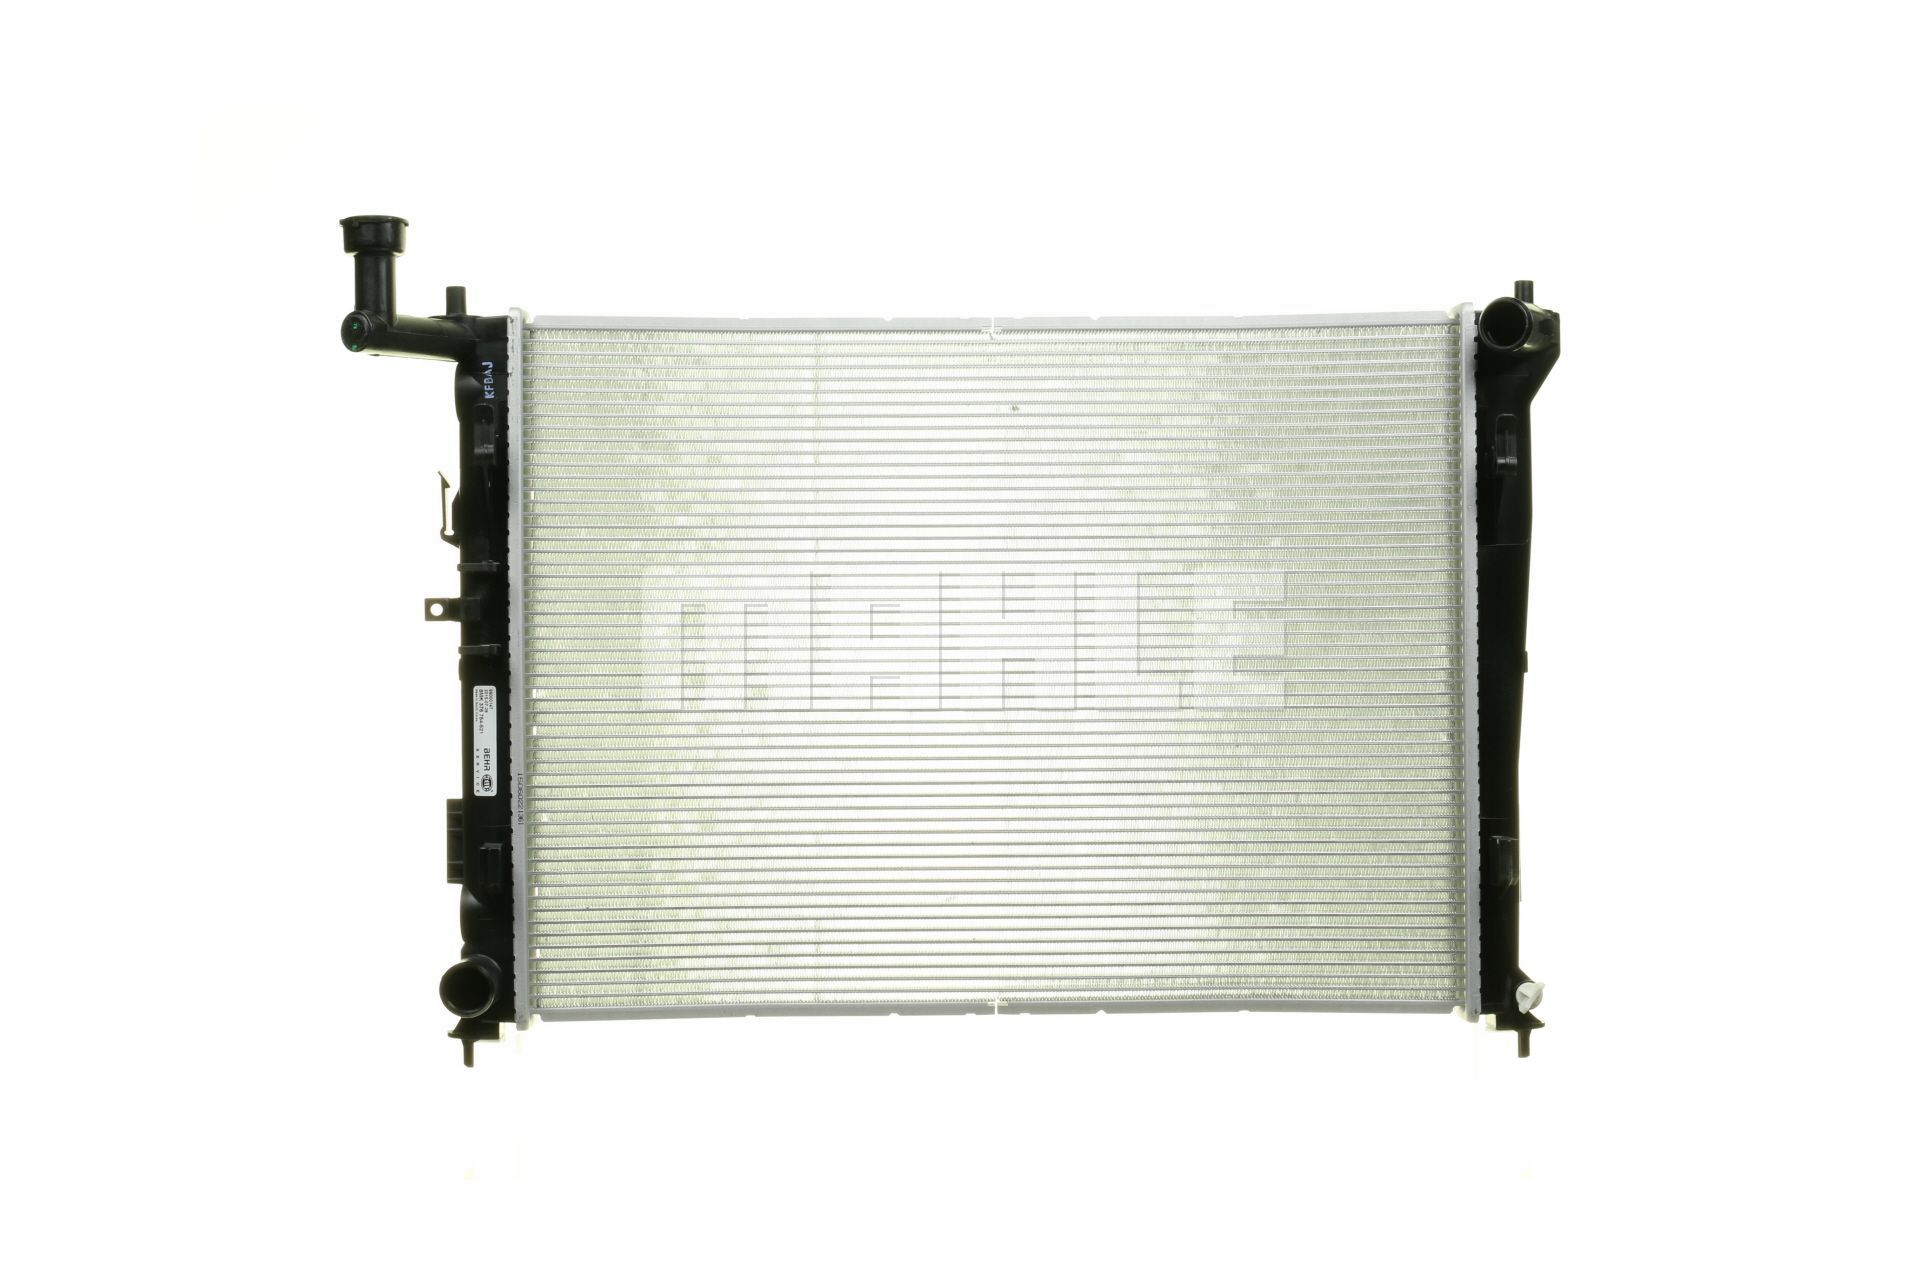 376754521 MAHLE ORIGINAL for vehicles with air conditioning, 600 x 456 x 14 mm, Manual Transmission, Brazed cooling fins Radiator CR 1118 000P buy